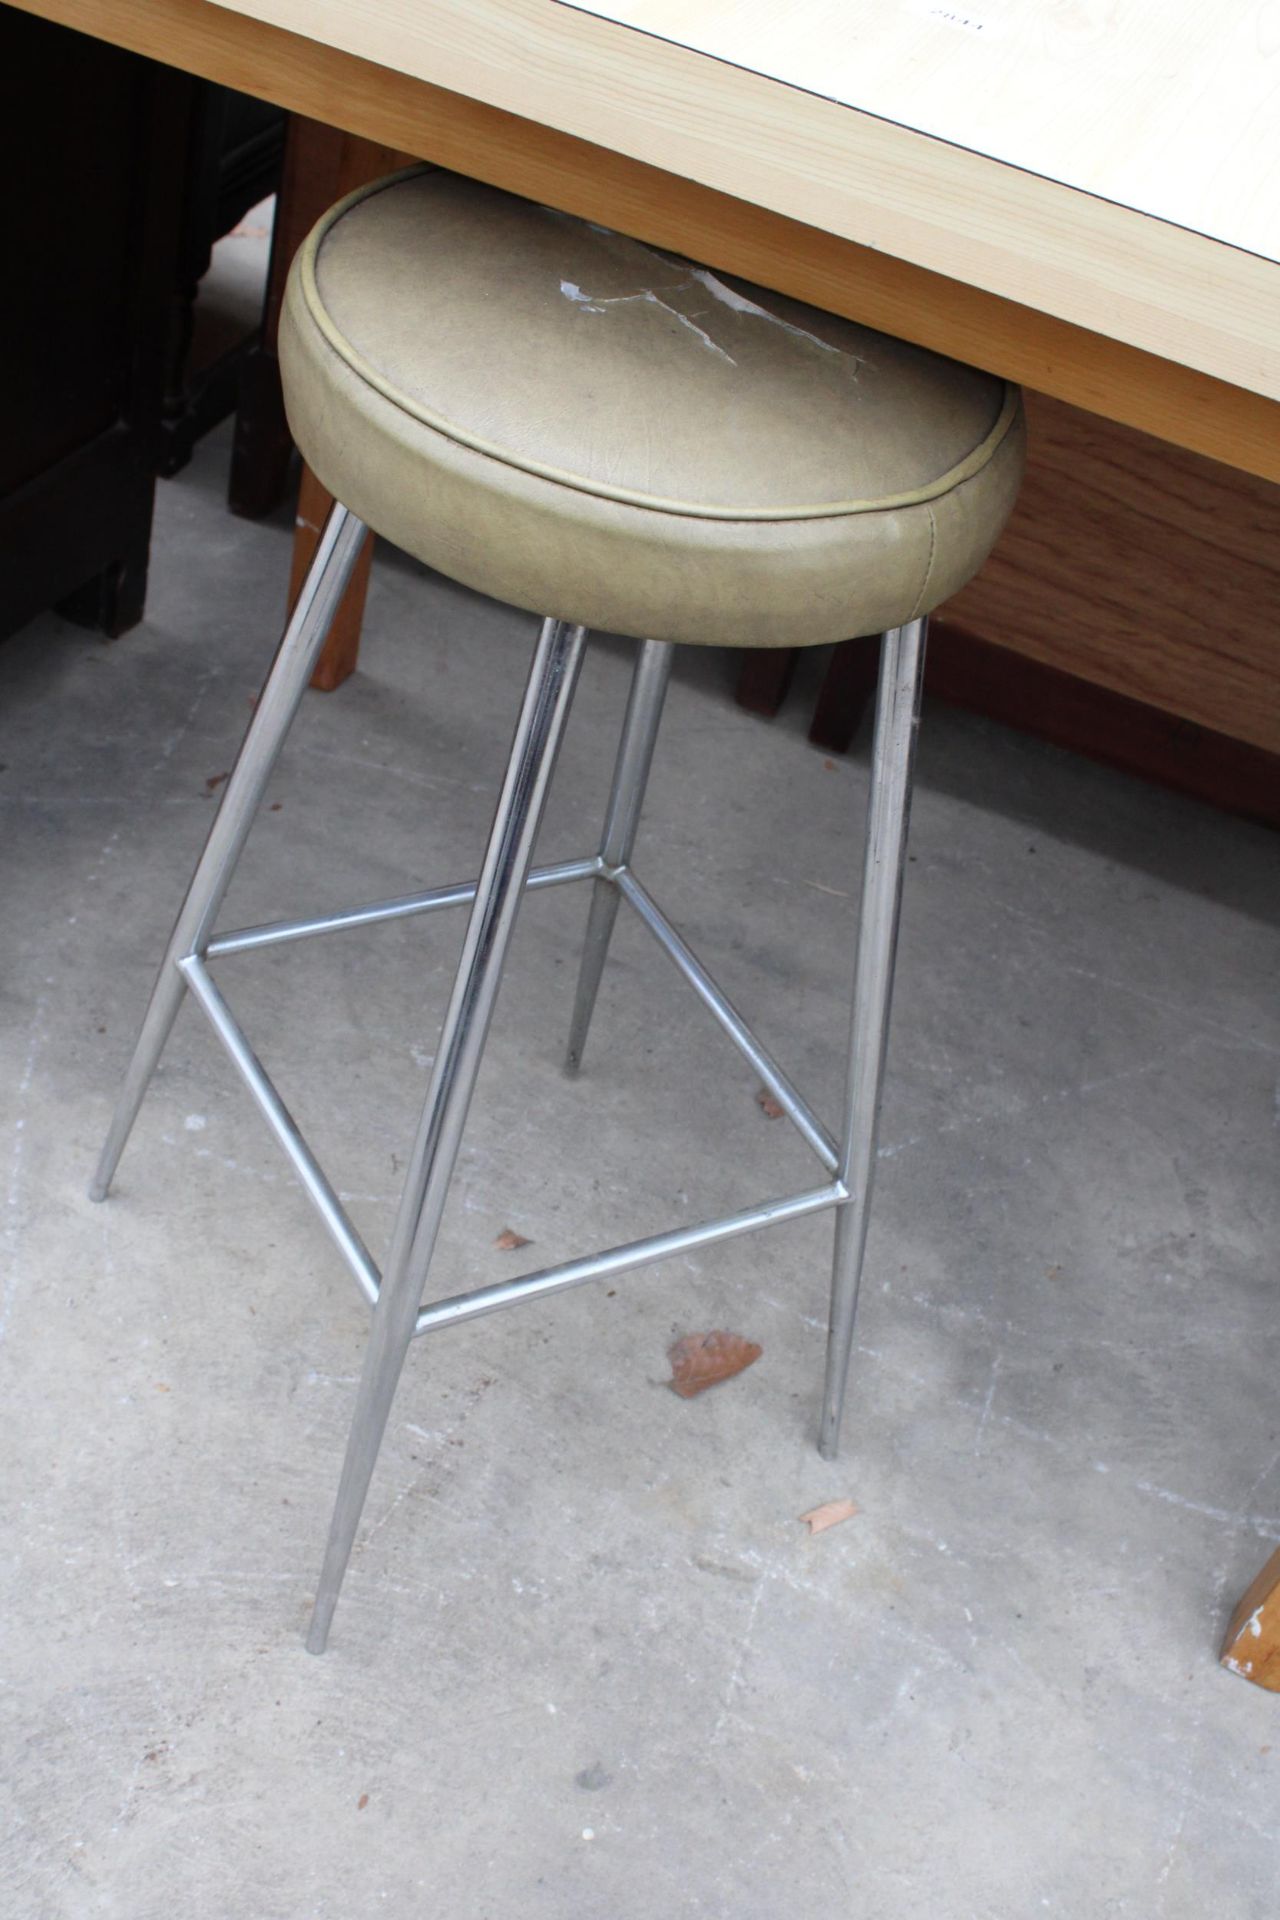 A FORMICA TOP KITCHEN TABLE 43" X 28" AND A KITCHEN STOOL - Image 2 of 2